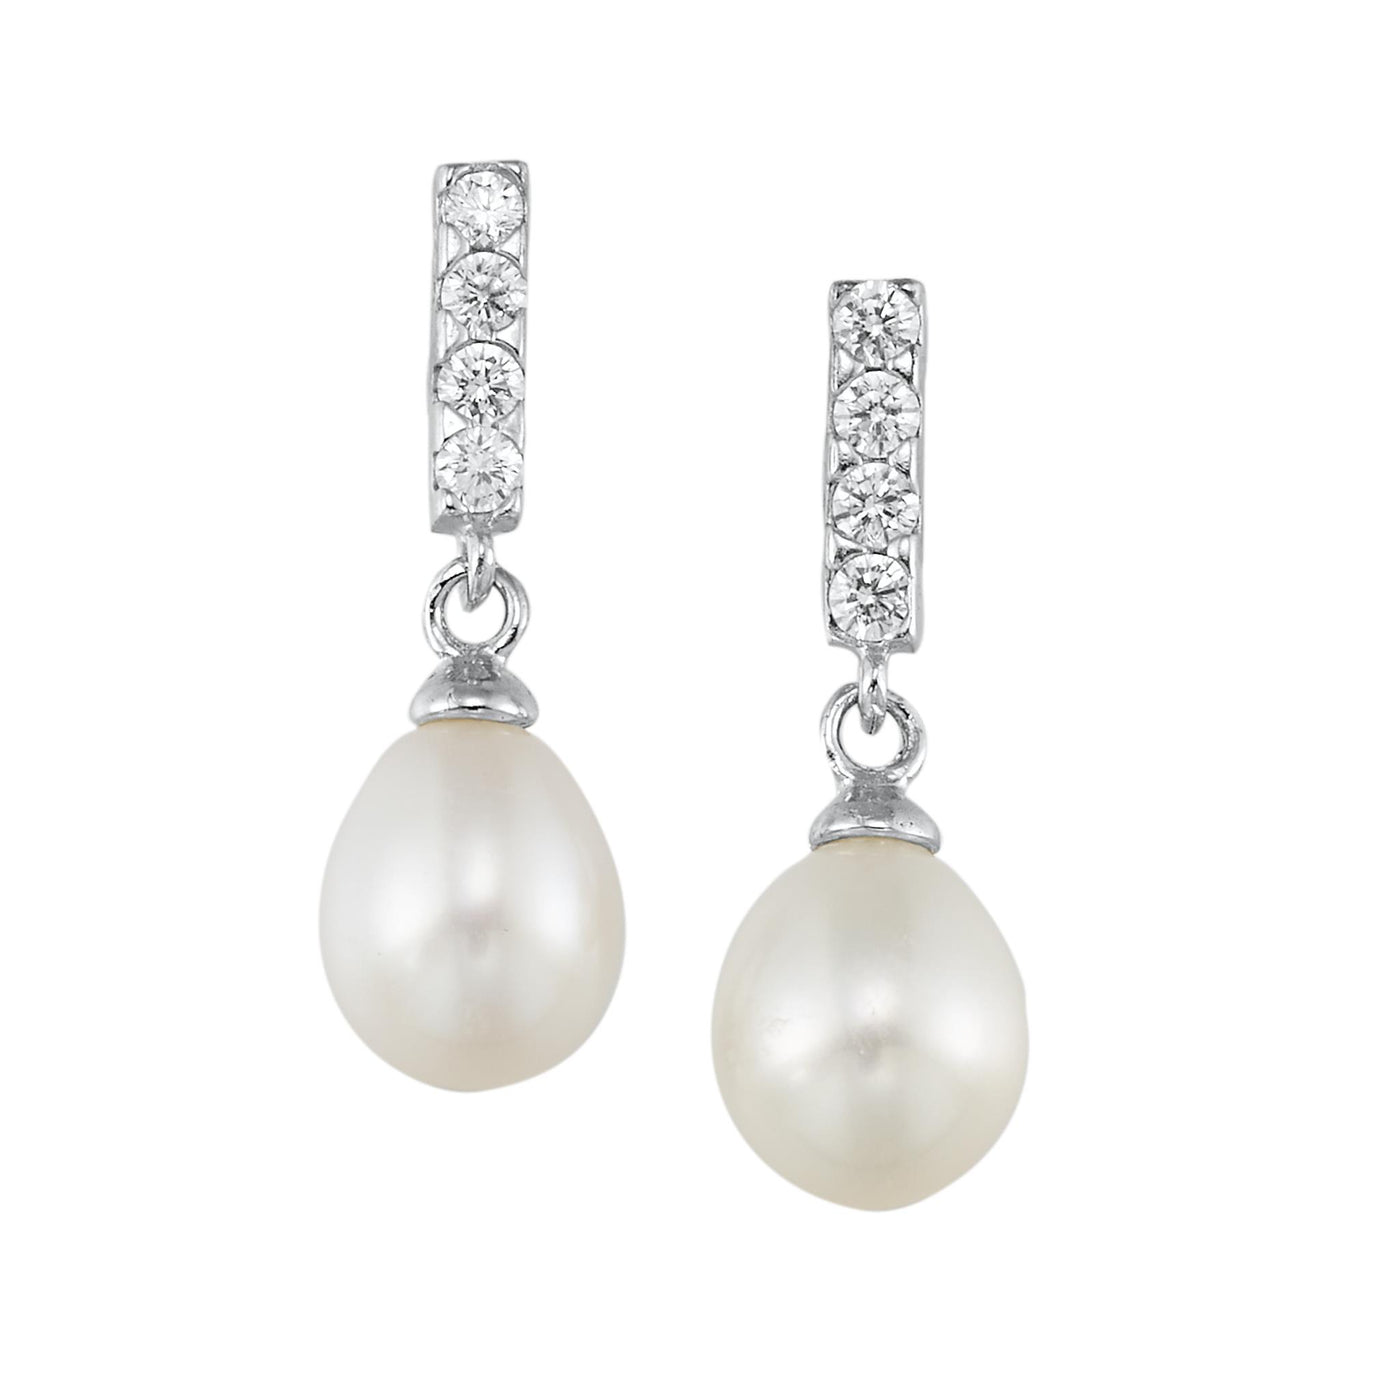 Sterling Silver Dangle Style Earrings Featuring White Freshwater Pearls and Cubic Zirconia